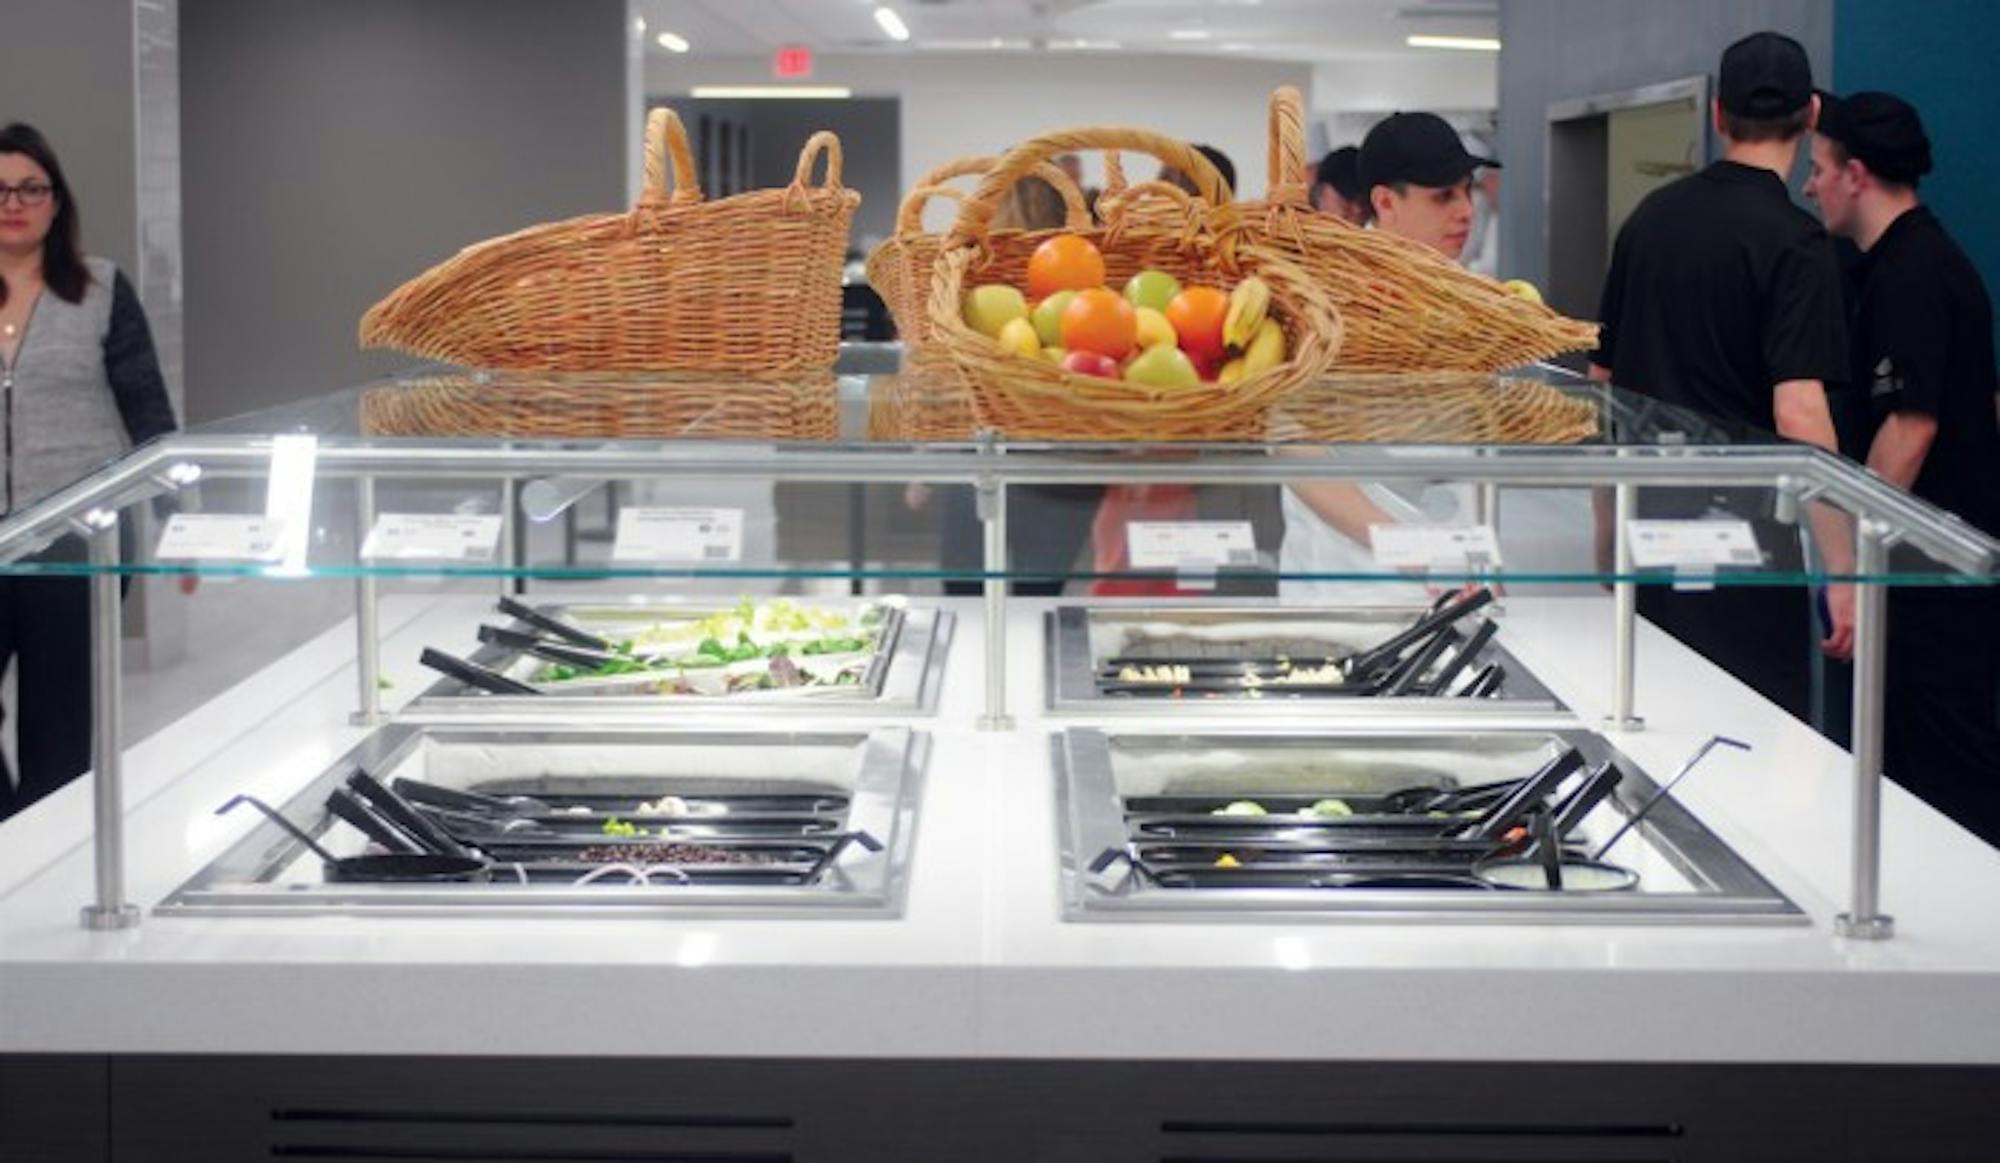 North Dining Hall now features NDH Marketplace in place of Grab ‘n Go, where students can buy smaller snacks using flex points instead of a full meal swipe. The changes were mainly student-driven.